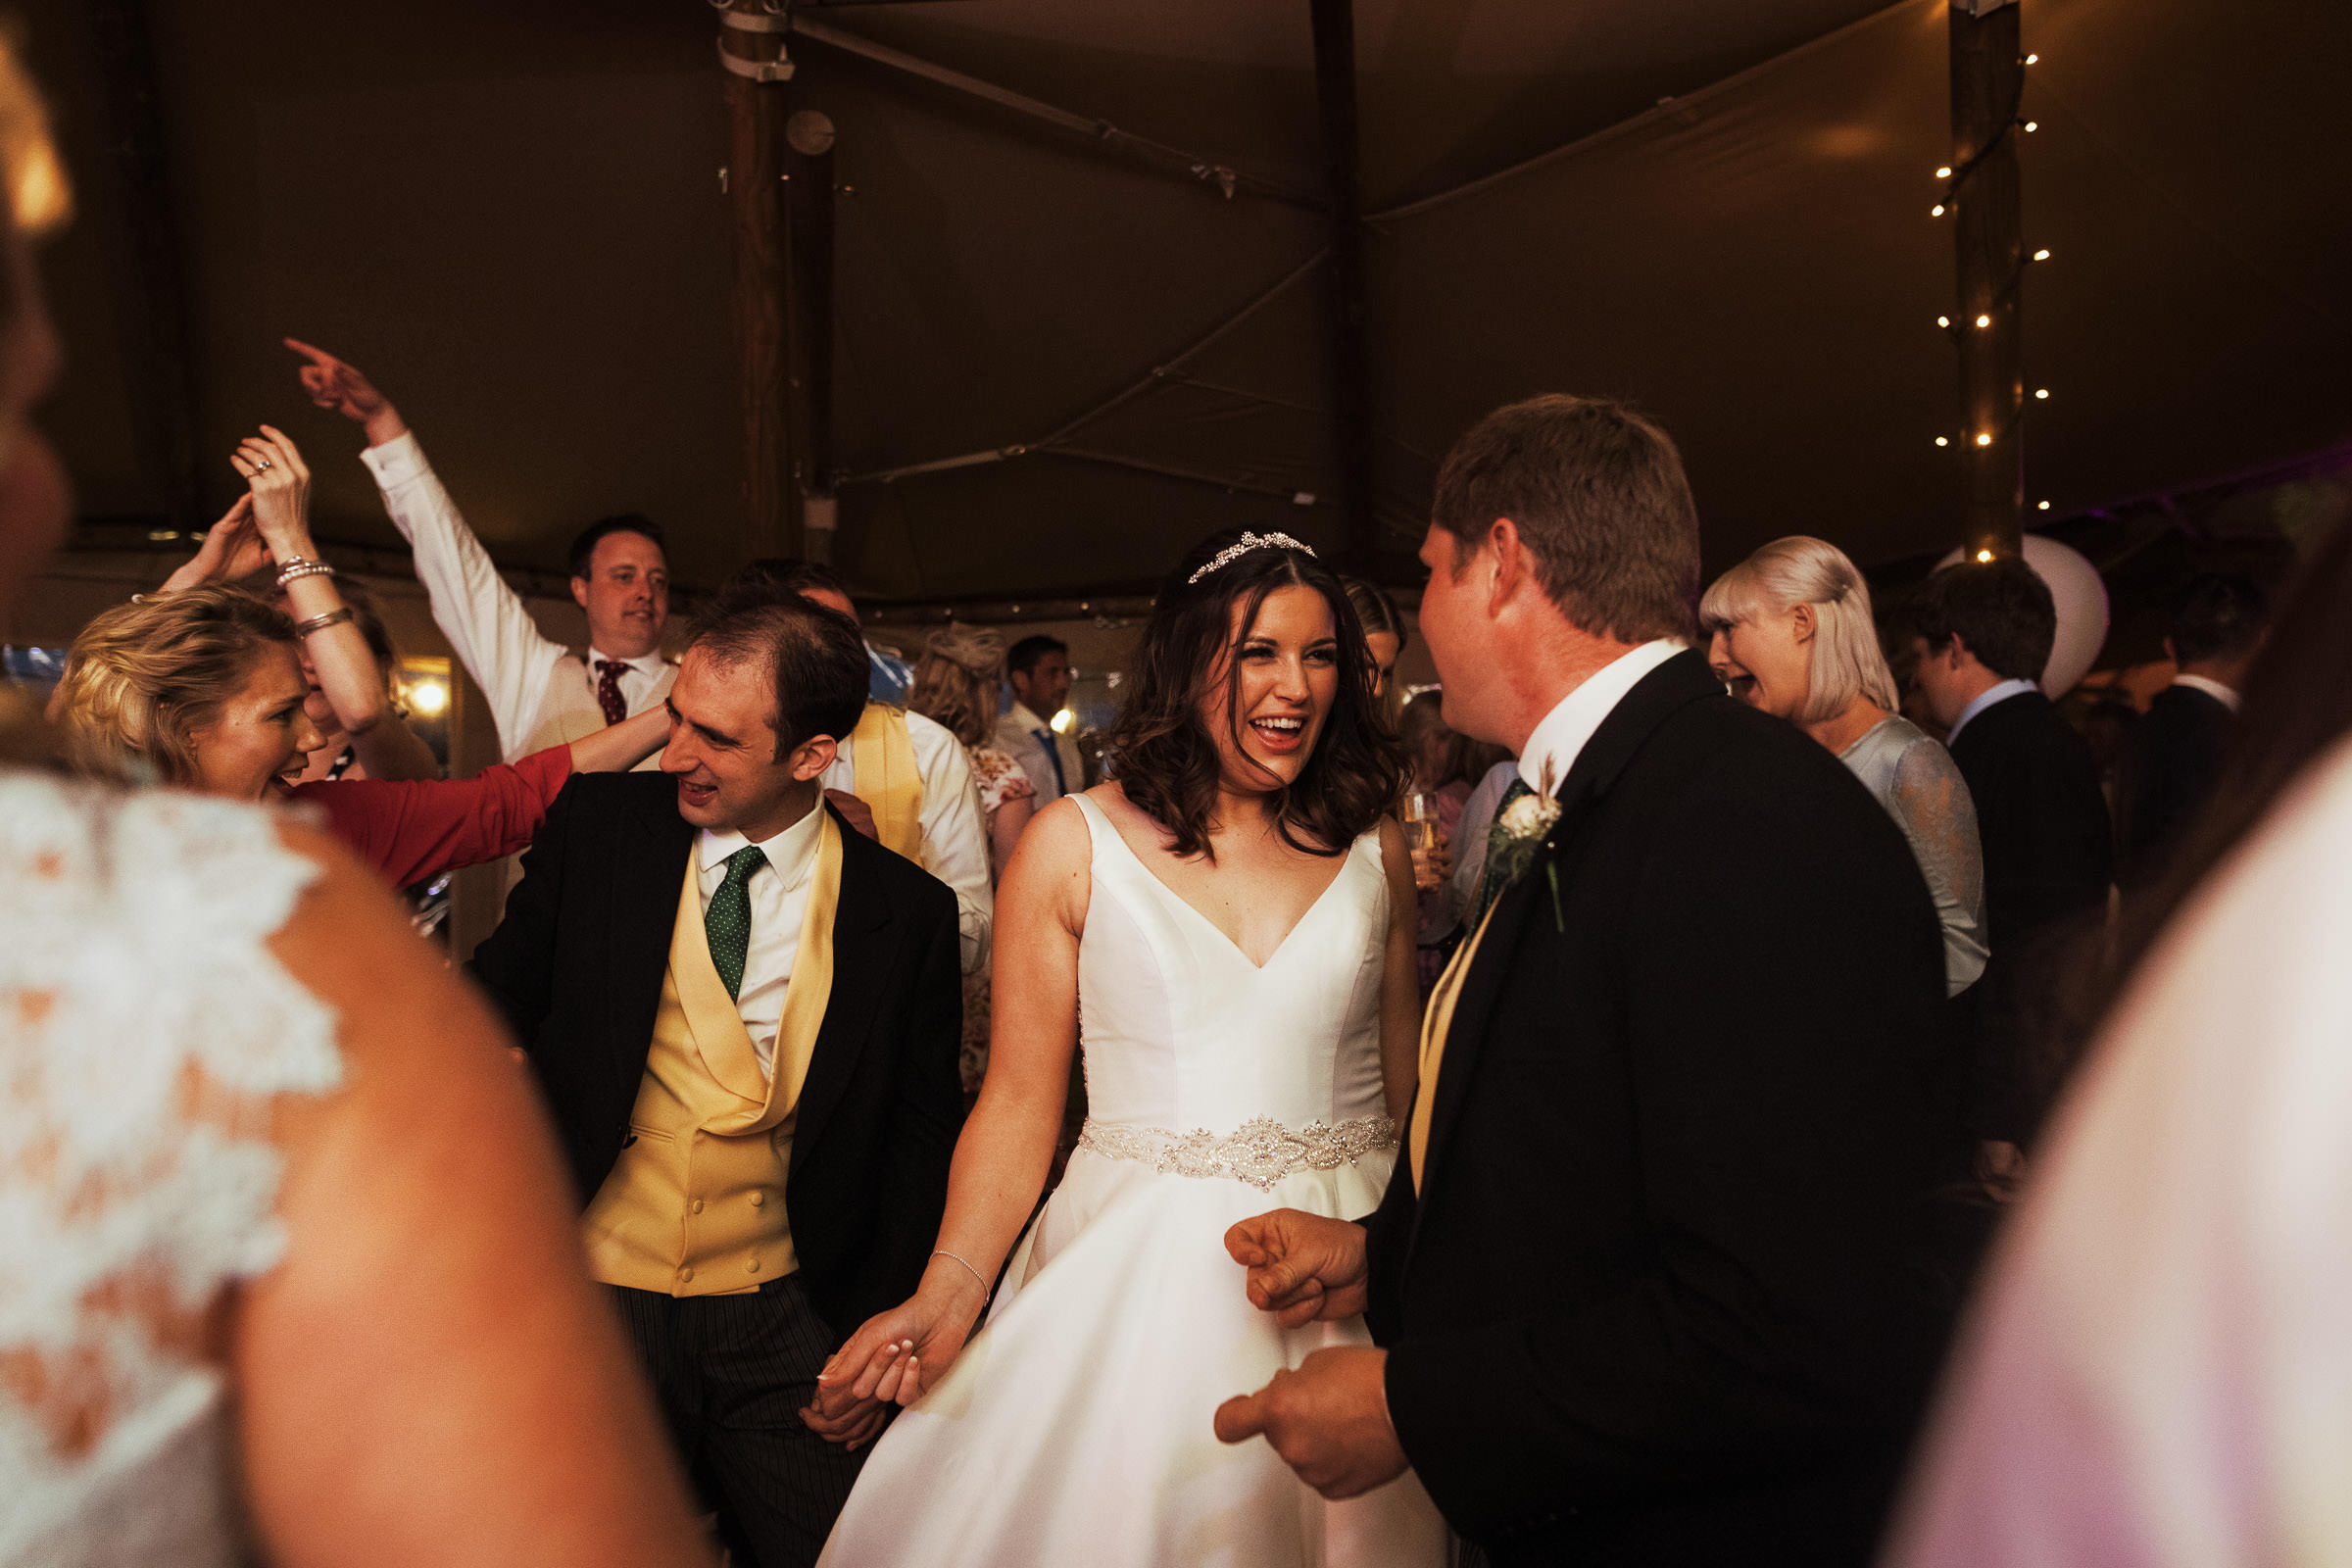 Bride and groom dancing with guests at their Essex wedding in a tipi on a farm.